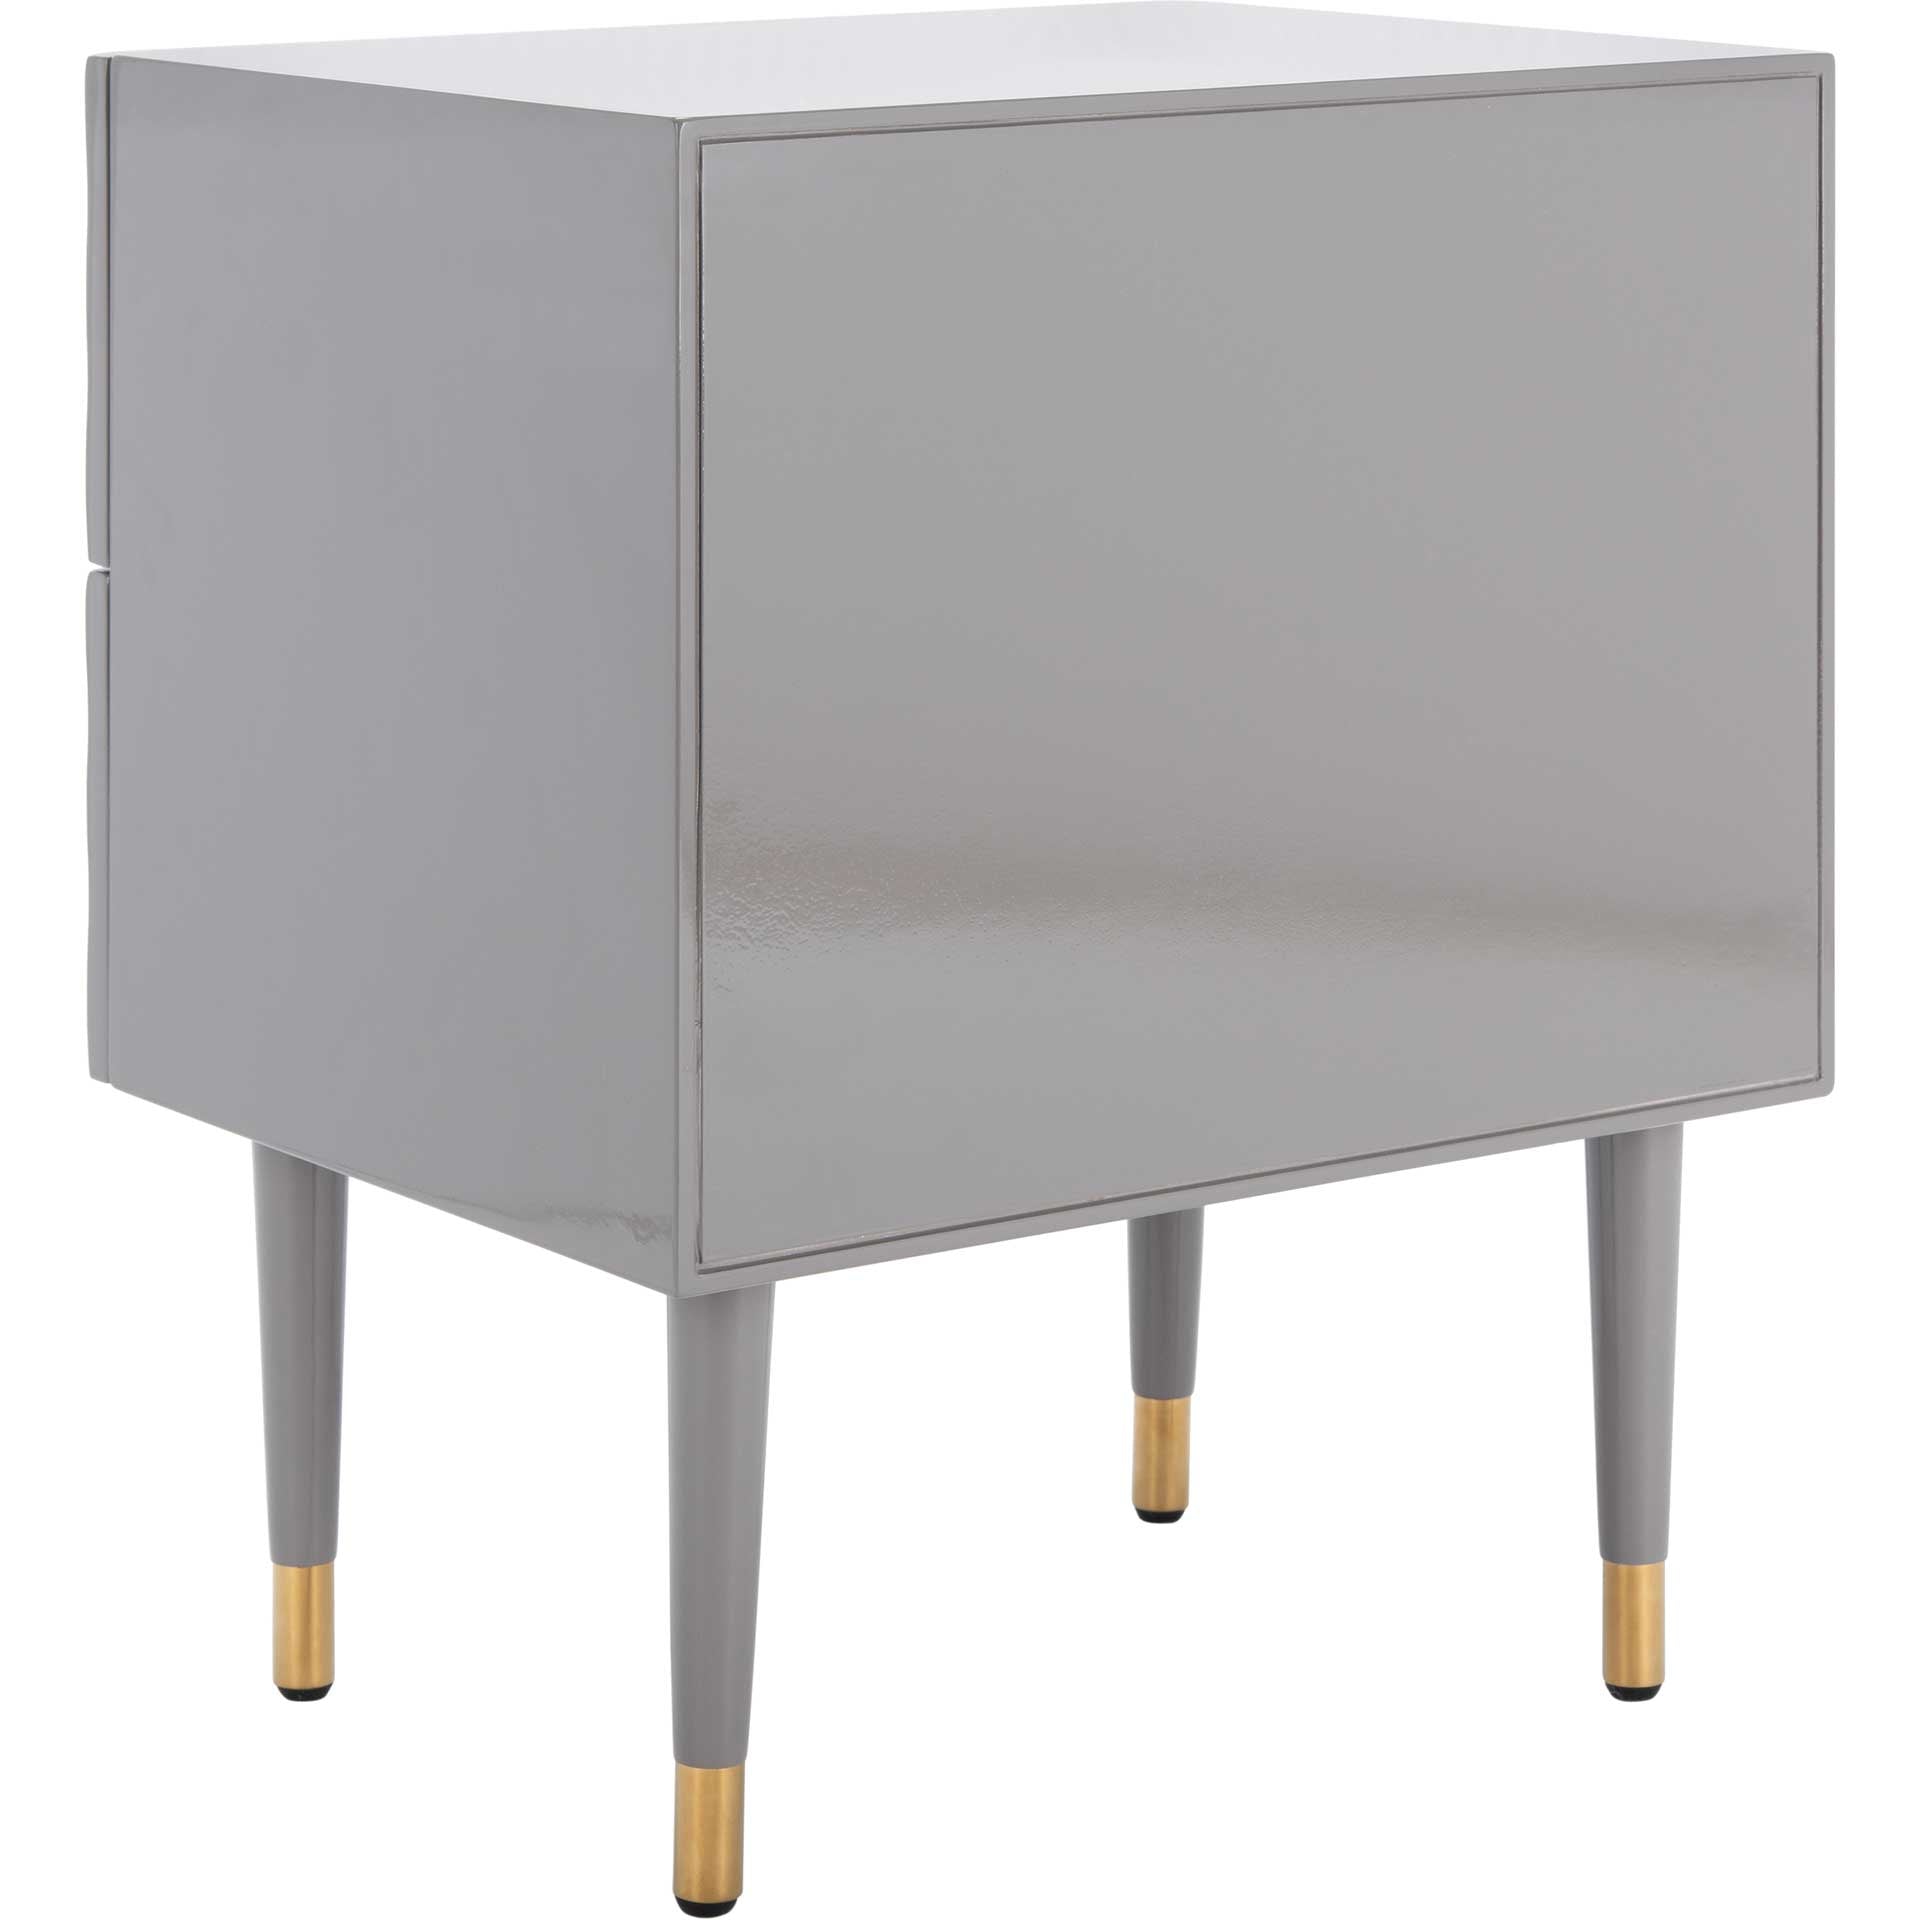 Nevaeh 2 Drawer Side Table Gray/Gold